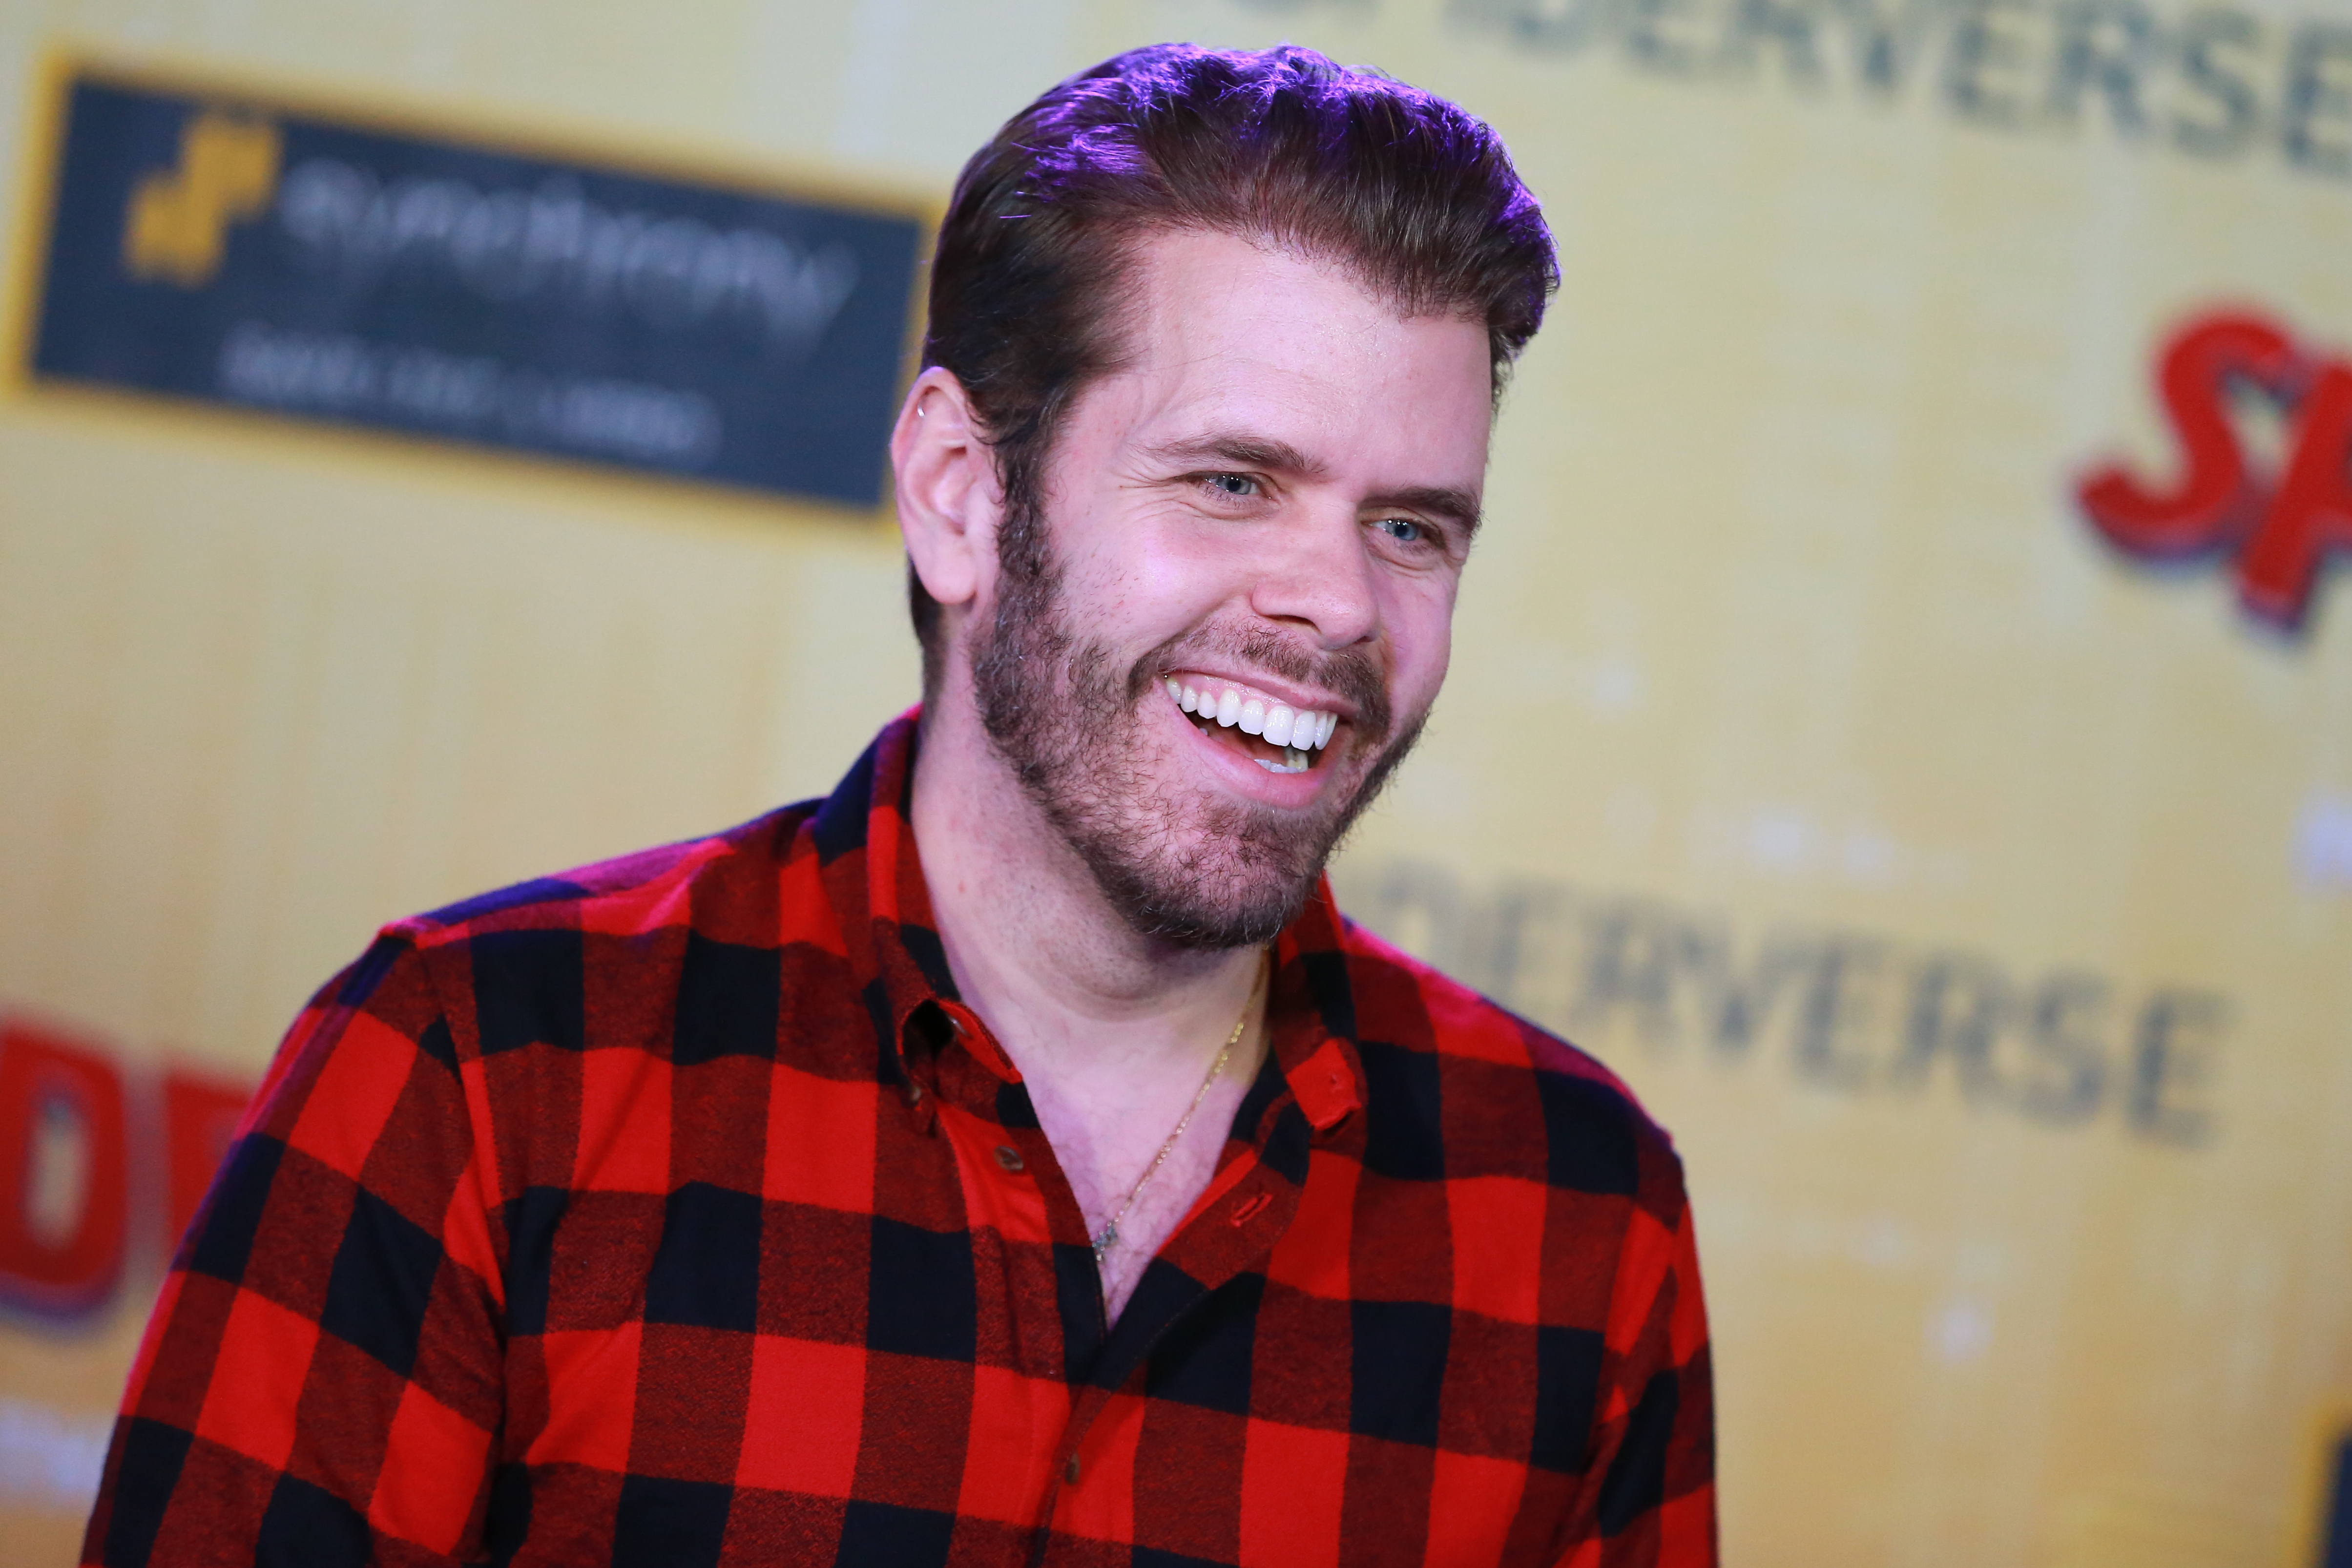 Perez Hilton attends the World Premiere Of Sony Pictures Animation And Marvel's "Spider-Man: Into The Spider-Verse" at Regency Village Theatre on December 1, 2018 in Westwood, California. | Source: Getty Images